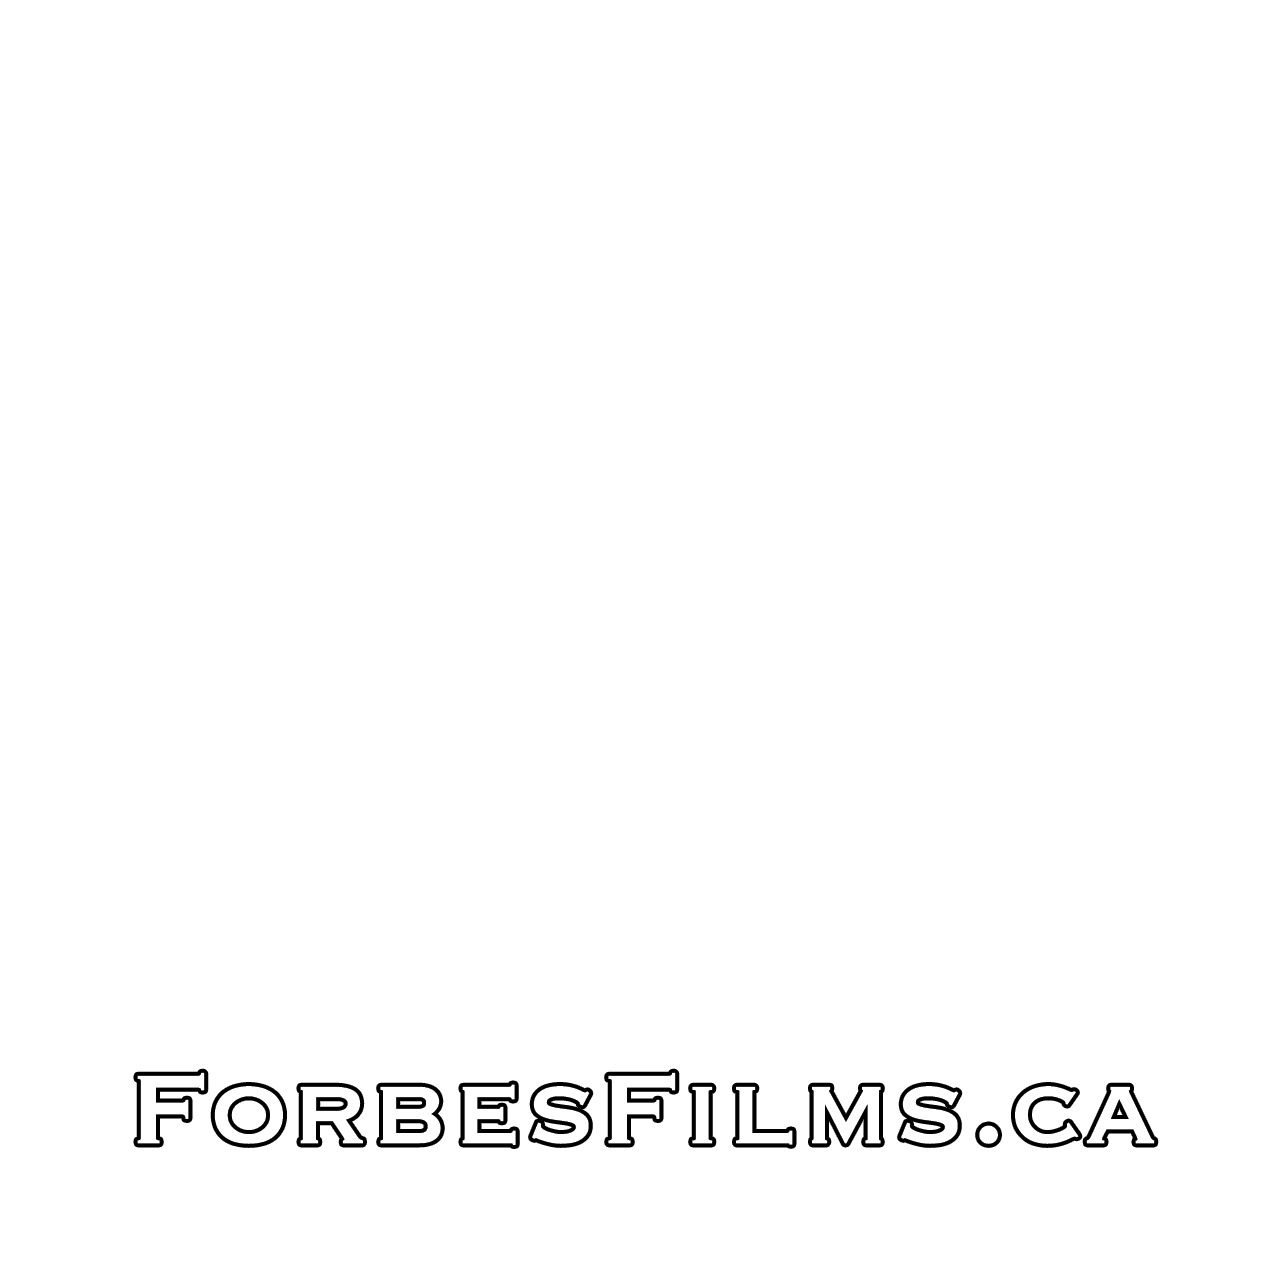 Forbes Films